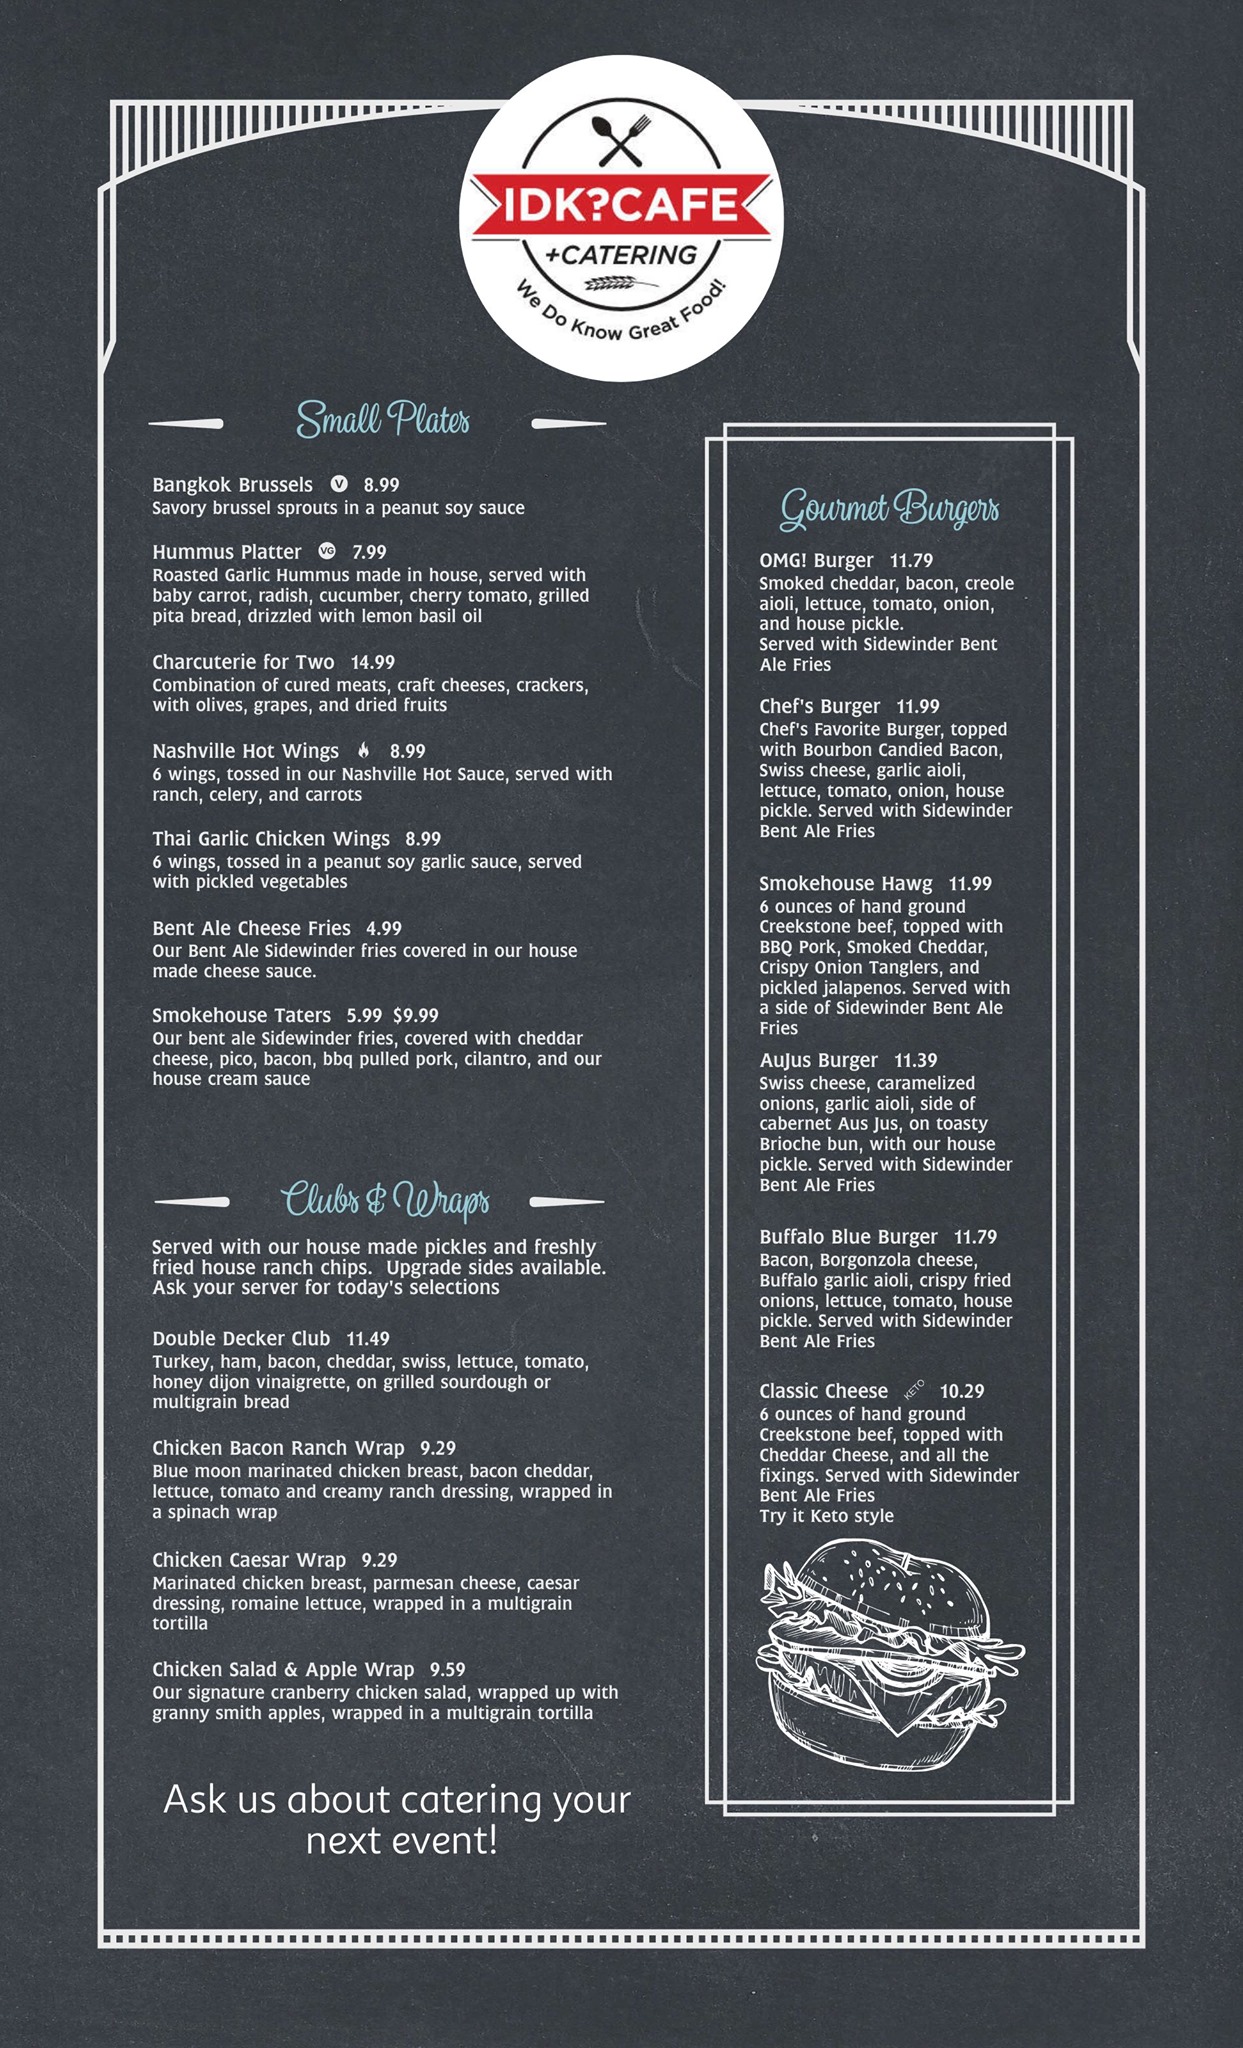 IDK? CAFE + Catering - Menu with Prices